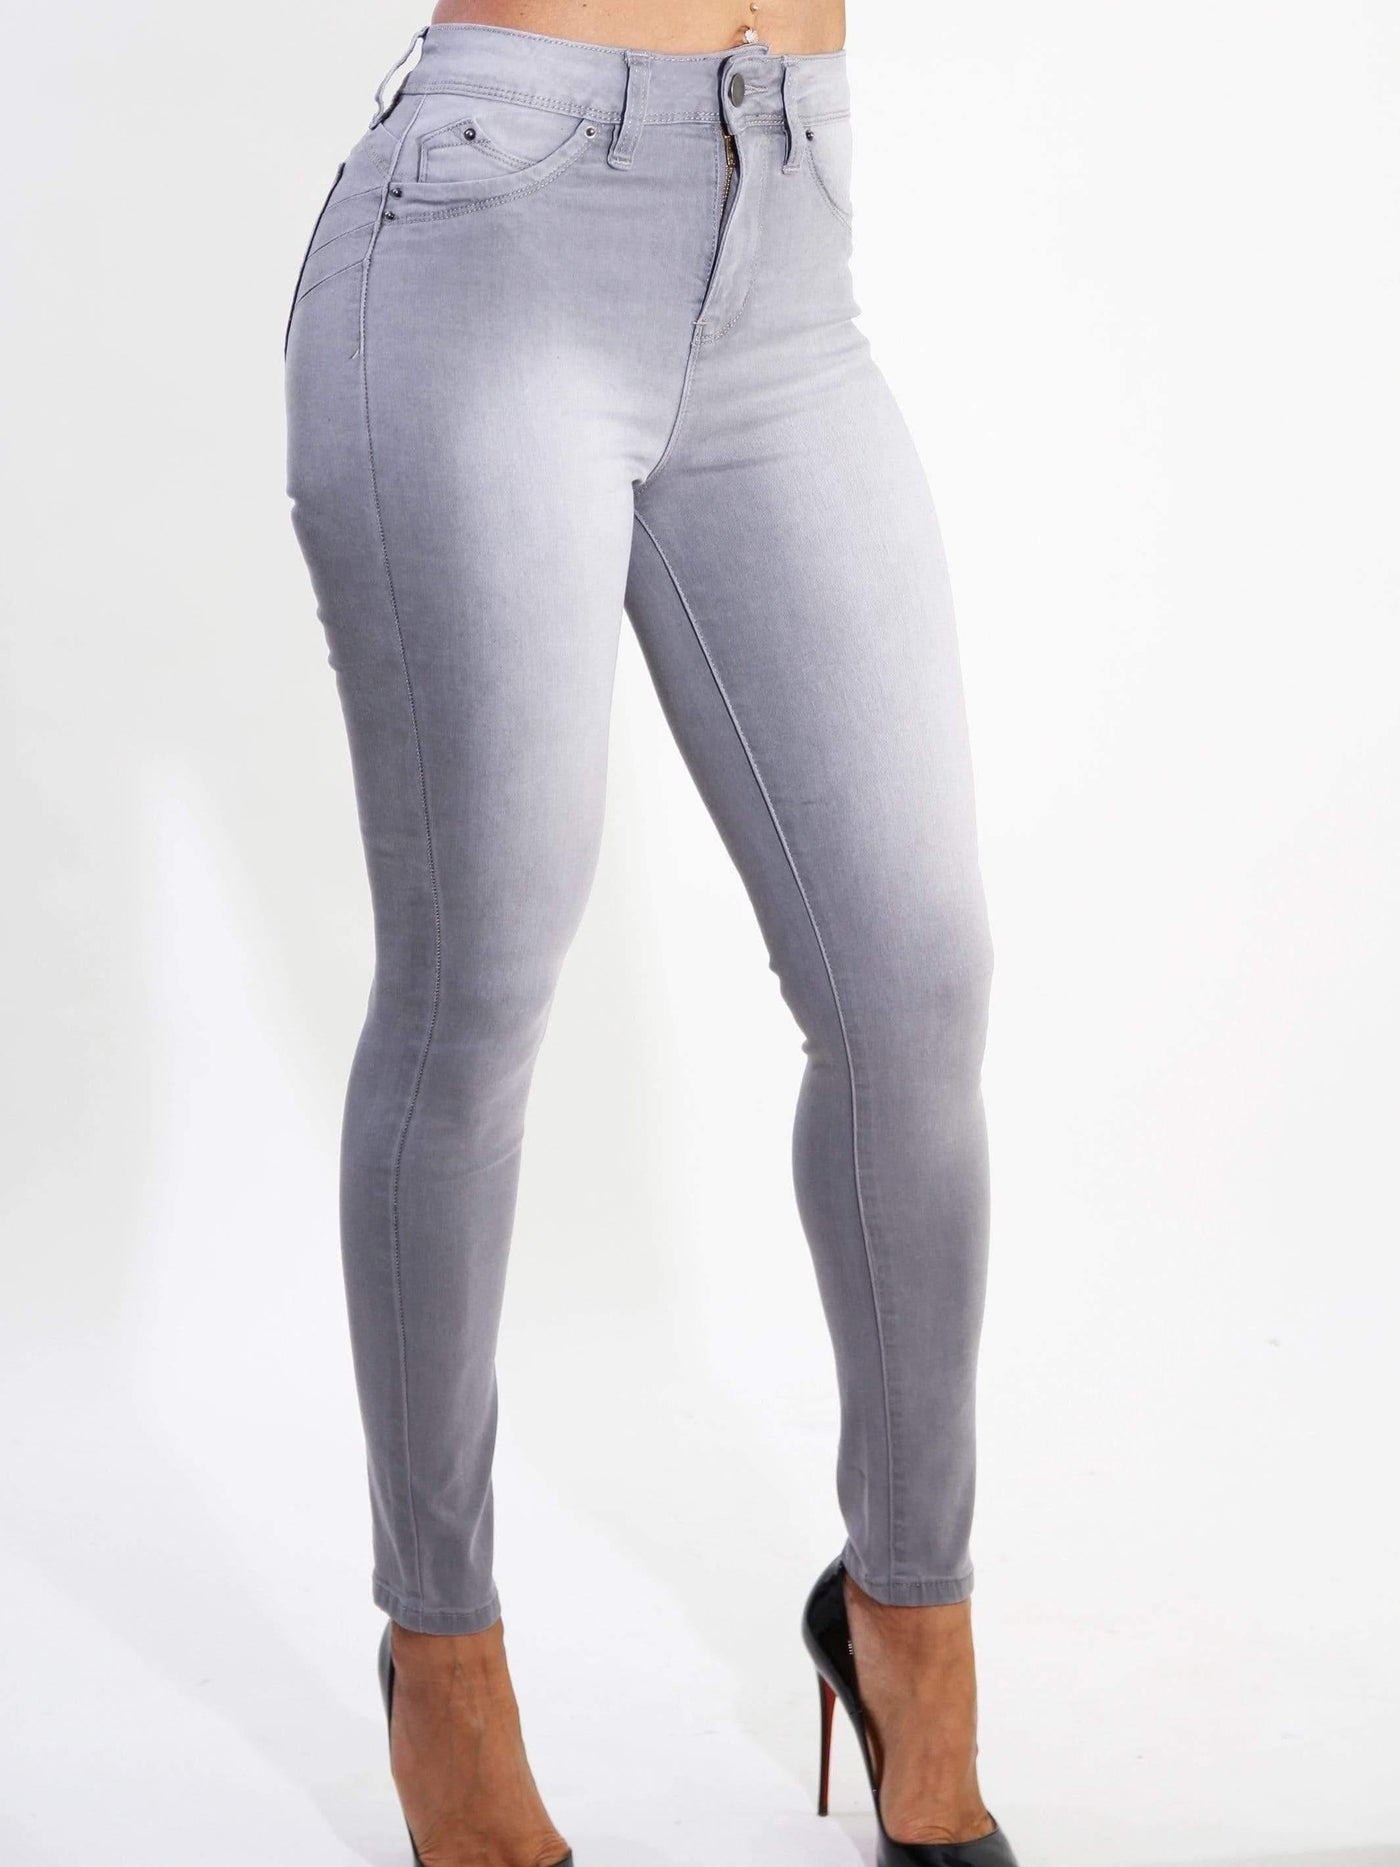 Lift Work | Skinny Fit Jeans - Statement Piece NY _tab_size-chart, Black, Blossom 2021, Blue, Bottoms, Brooklyn Boutique, Denim, Fall, Fall Fashion, Grey, Grey denim, High Waisted, high waisted pants, Long Pants, Misses, Monochrome, Skinny Fit, skinny pants, Standard Fall, statement, statement bottom, statement bottoms, Statement Clothing, statement piece, Statement Piece Boutique, statement piece ny, Statement Pieces, Statement Pieces Boutique, Women's Boutique, XL Statement Bottoms